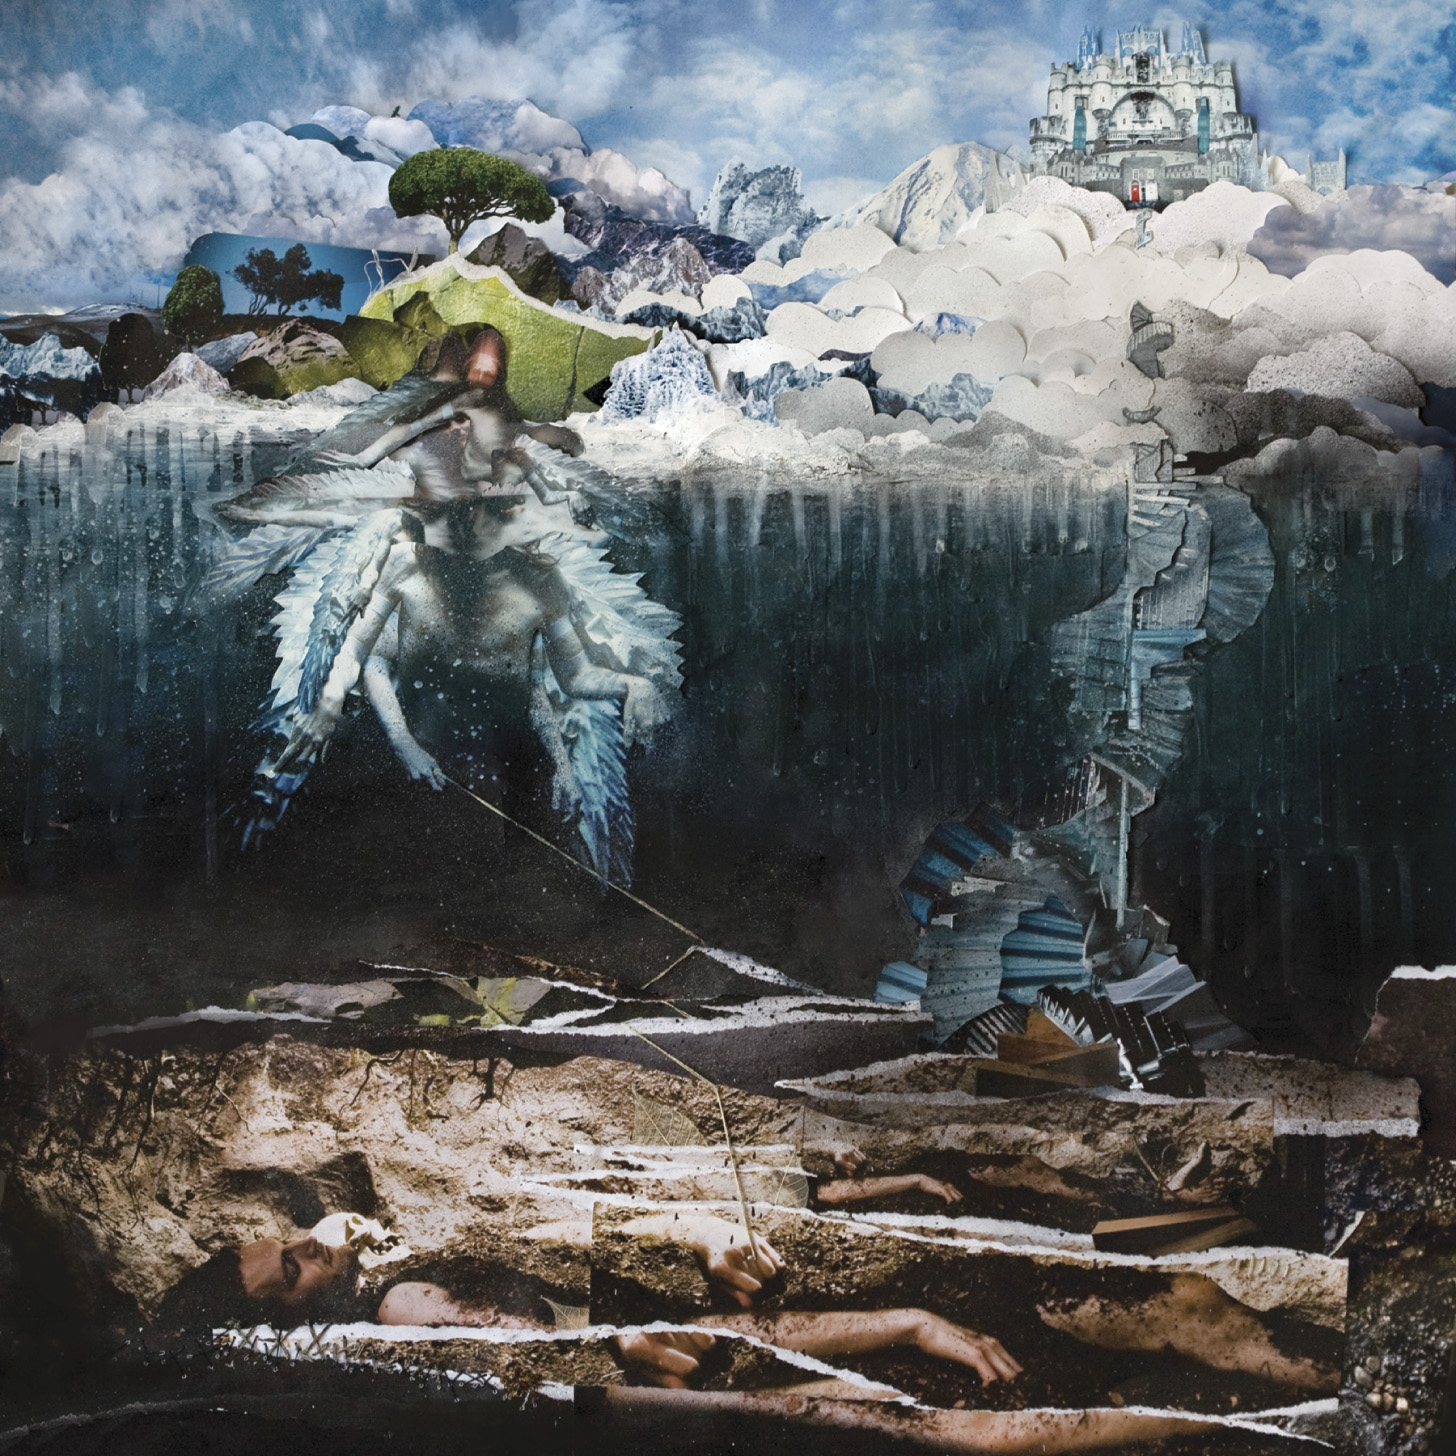 Well it is my avatar. The Empyrean - John Frusciante